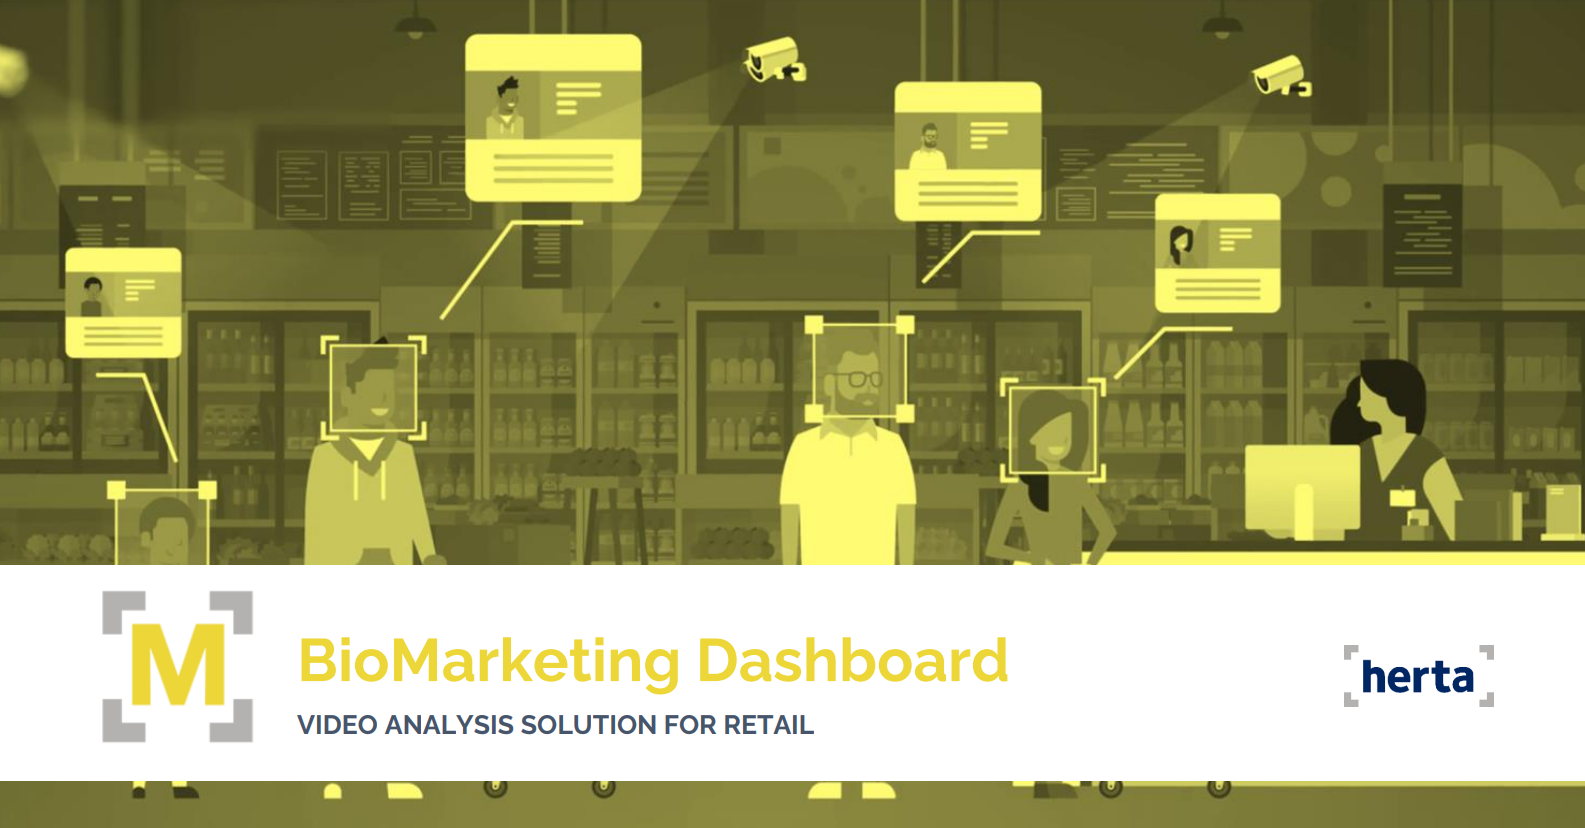 The video analytics solution every retail company should have